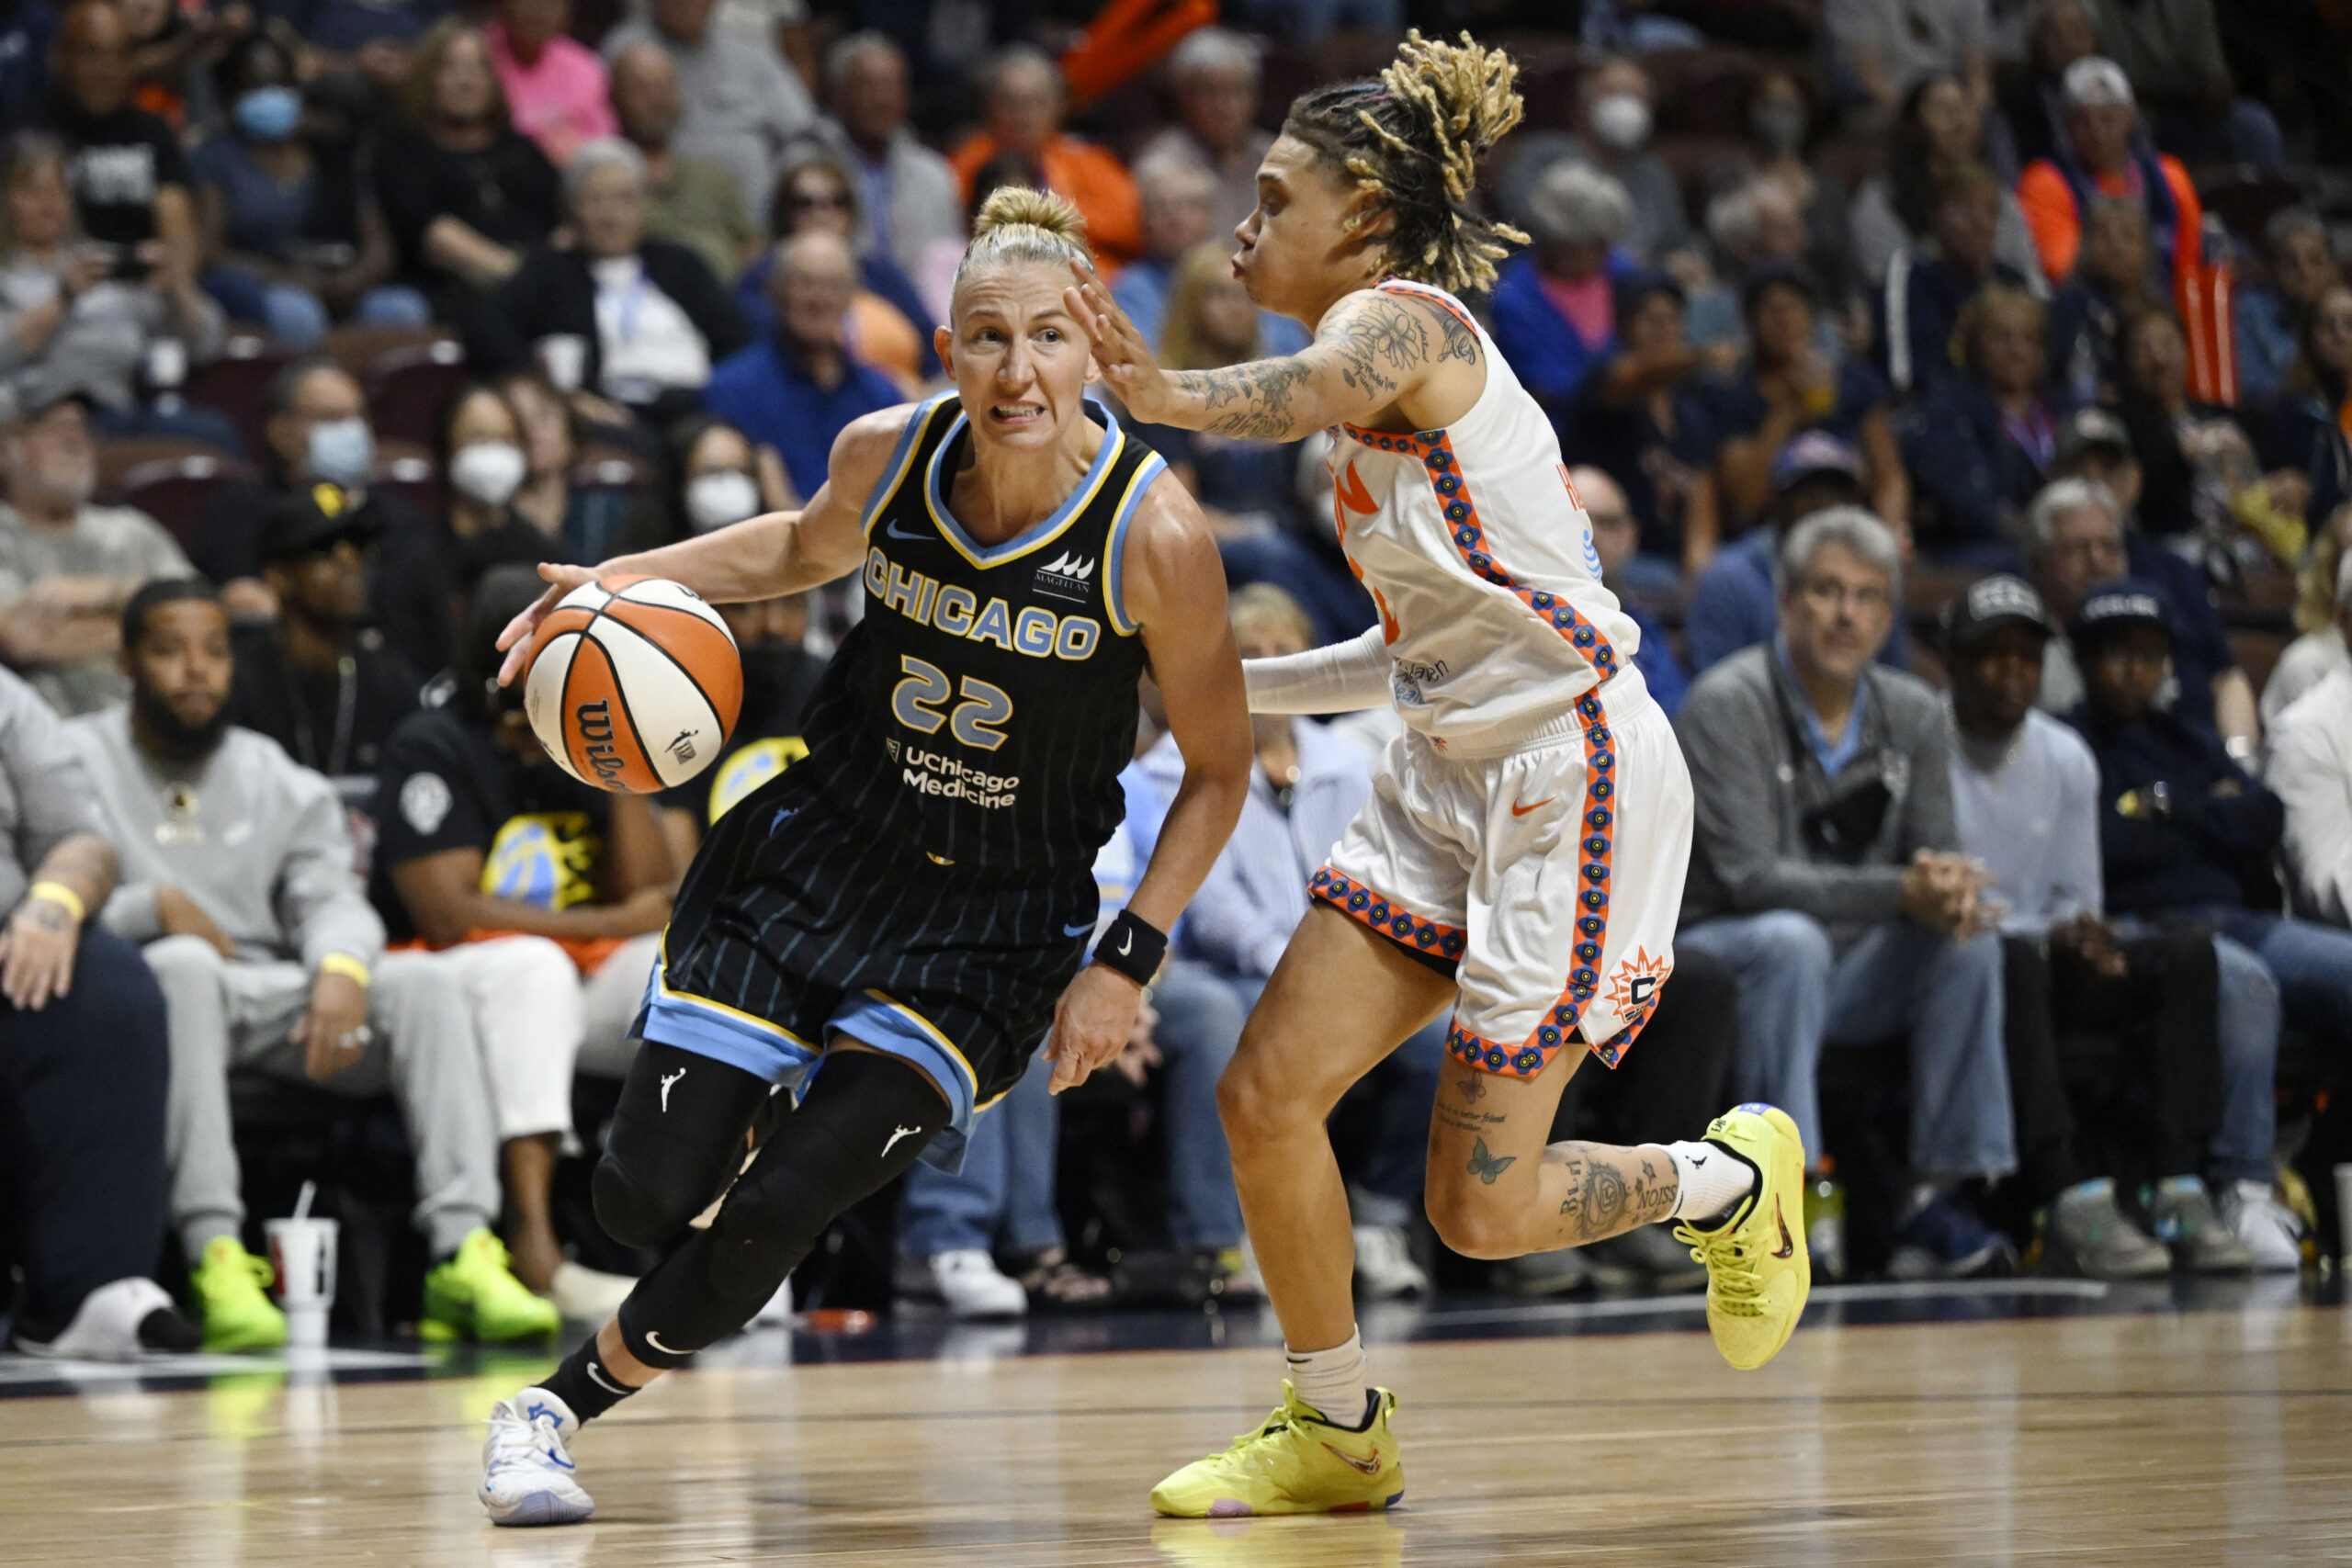 WNBA Players Skipping Russia, Choosing Other Places to Play